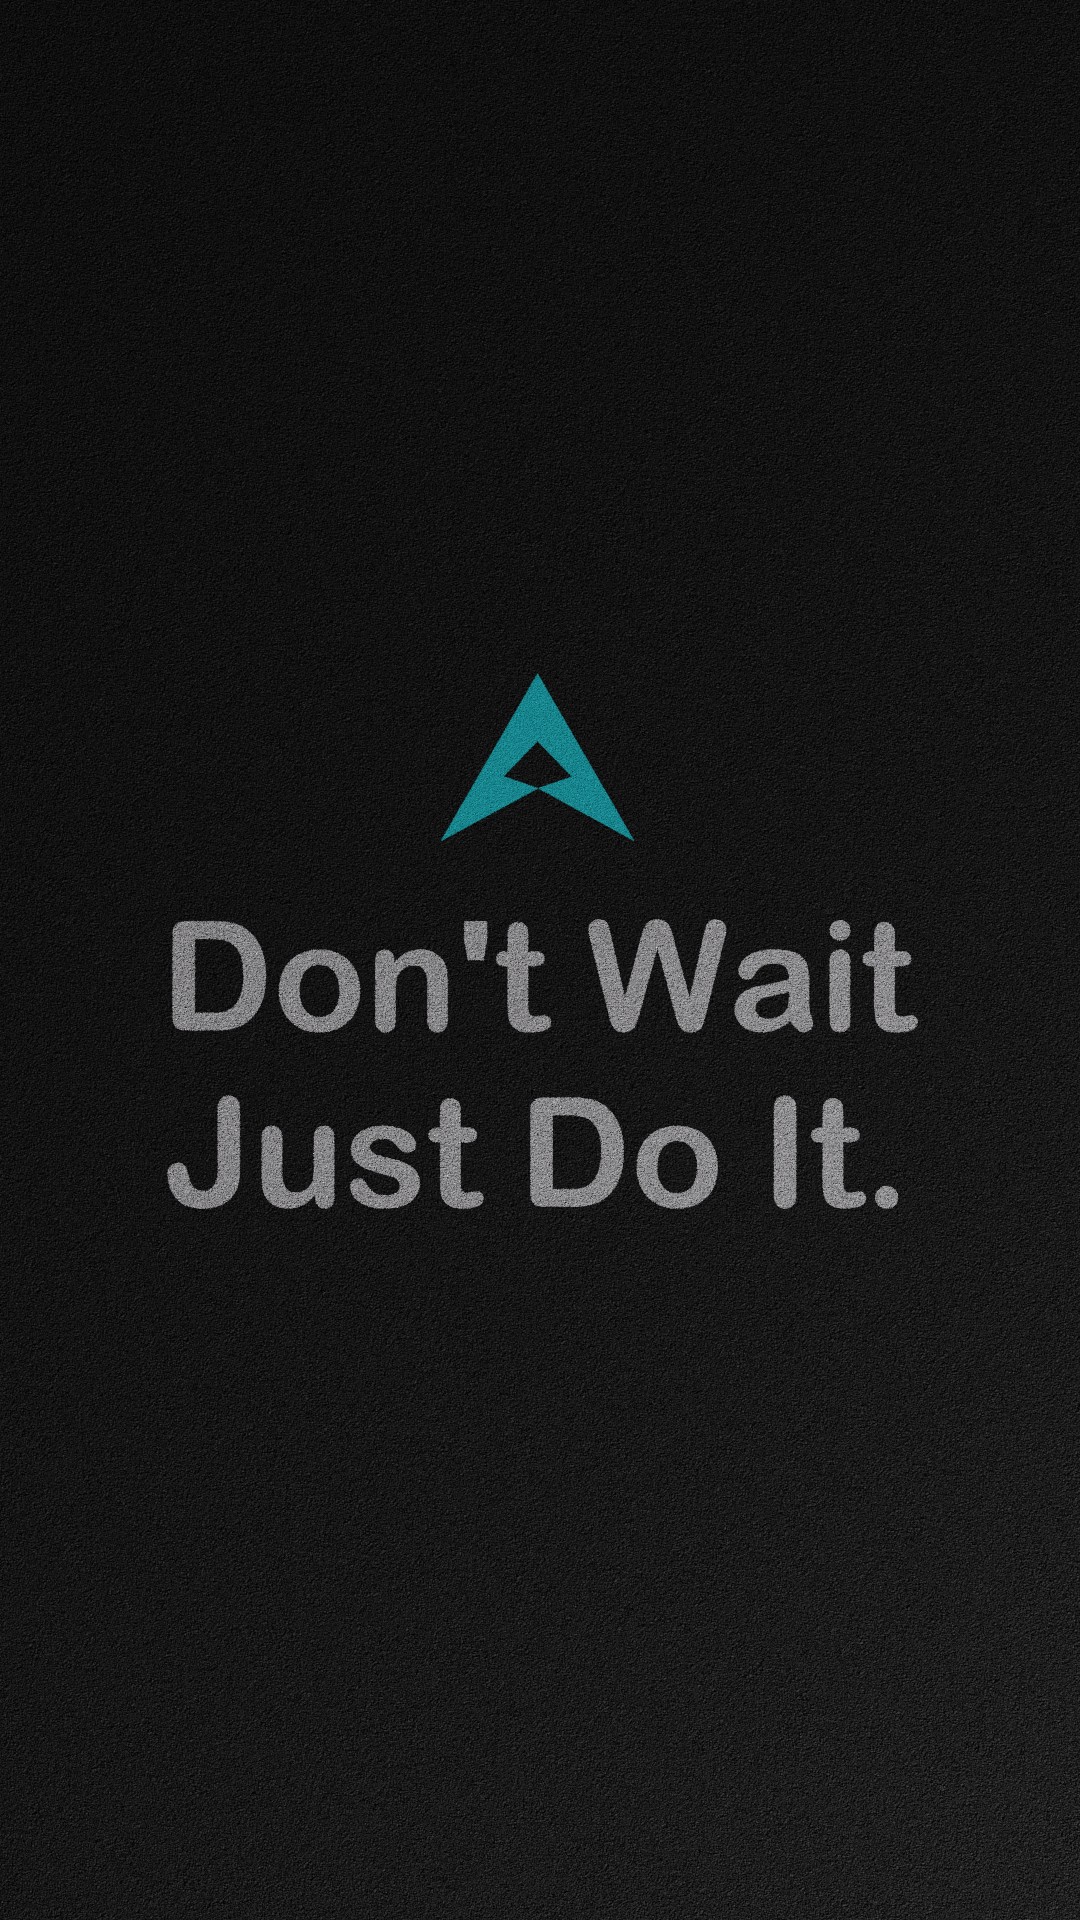 Don't Wait Just Do It hd wallpaper for smartphone